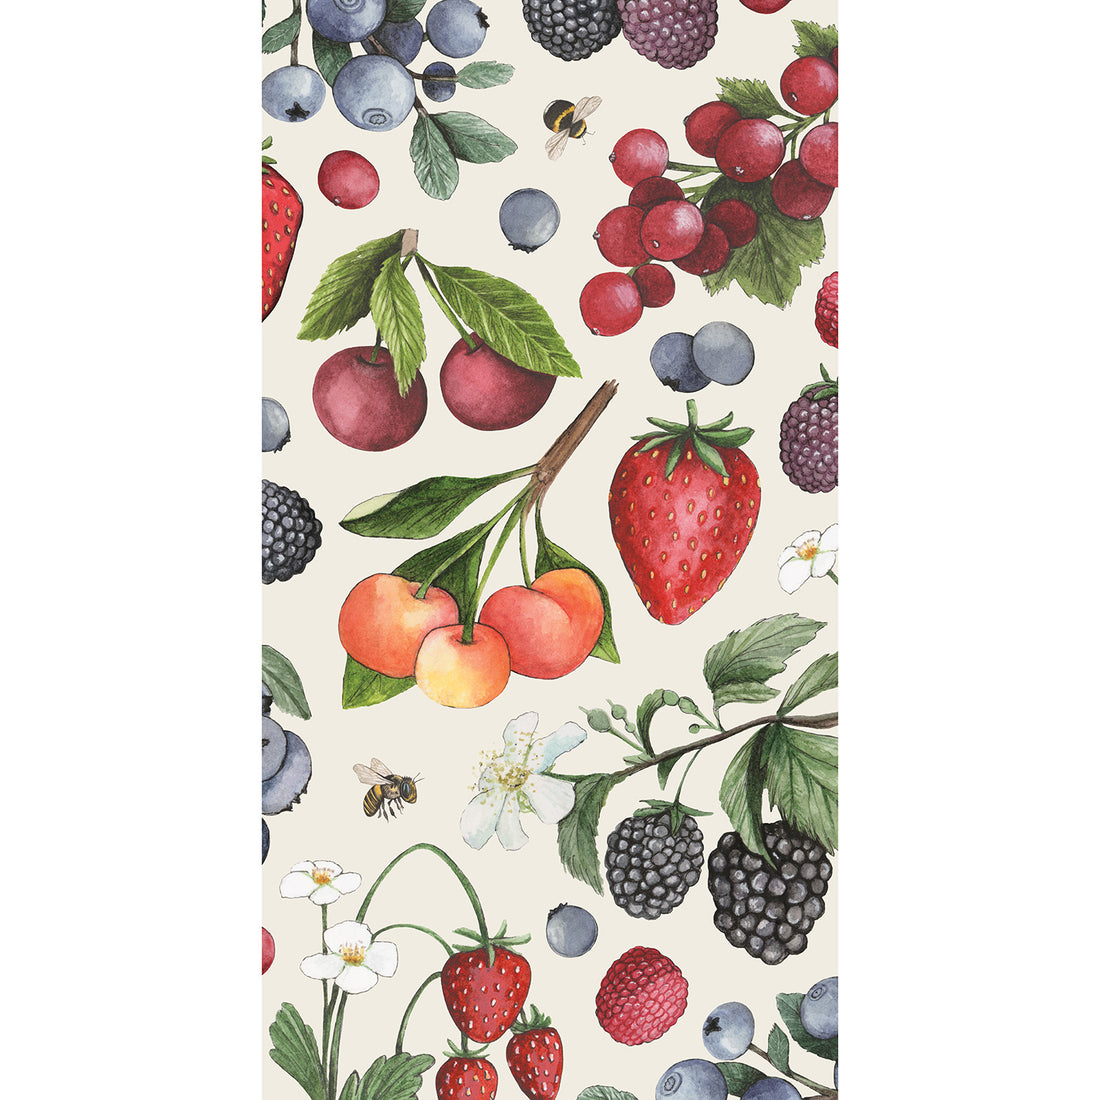 A rectangle, cream guest napkin featuring a scatter of vibrant, illustrated berries and white blooms, with a bees among the fruits.